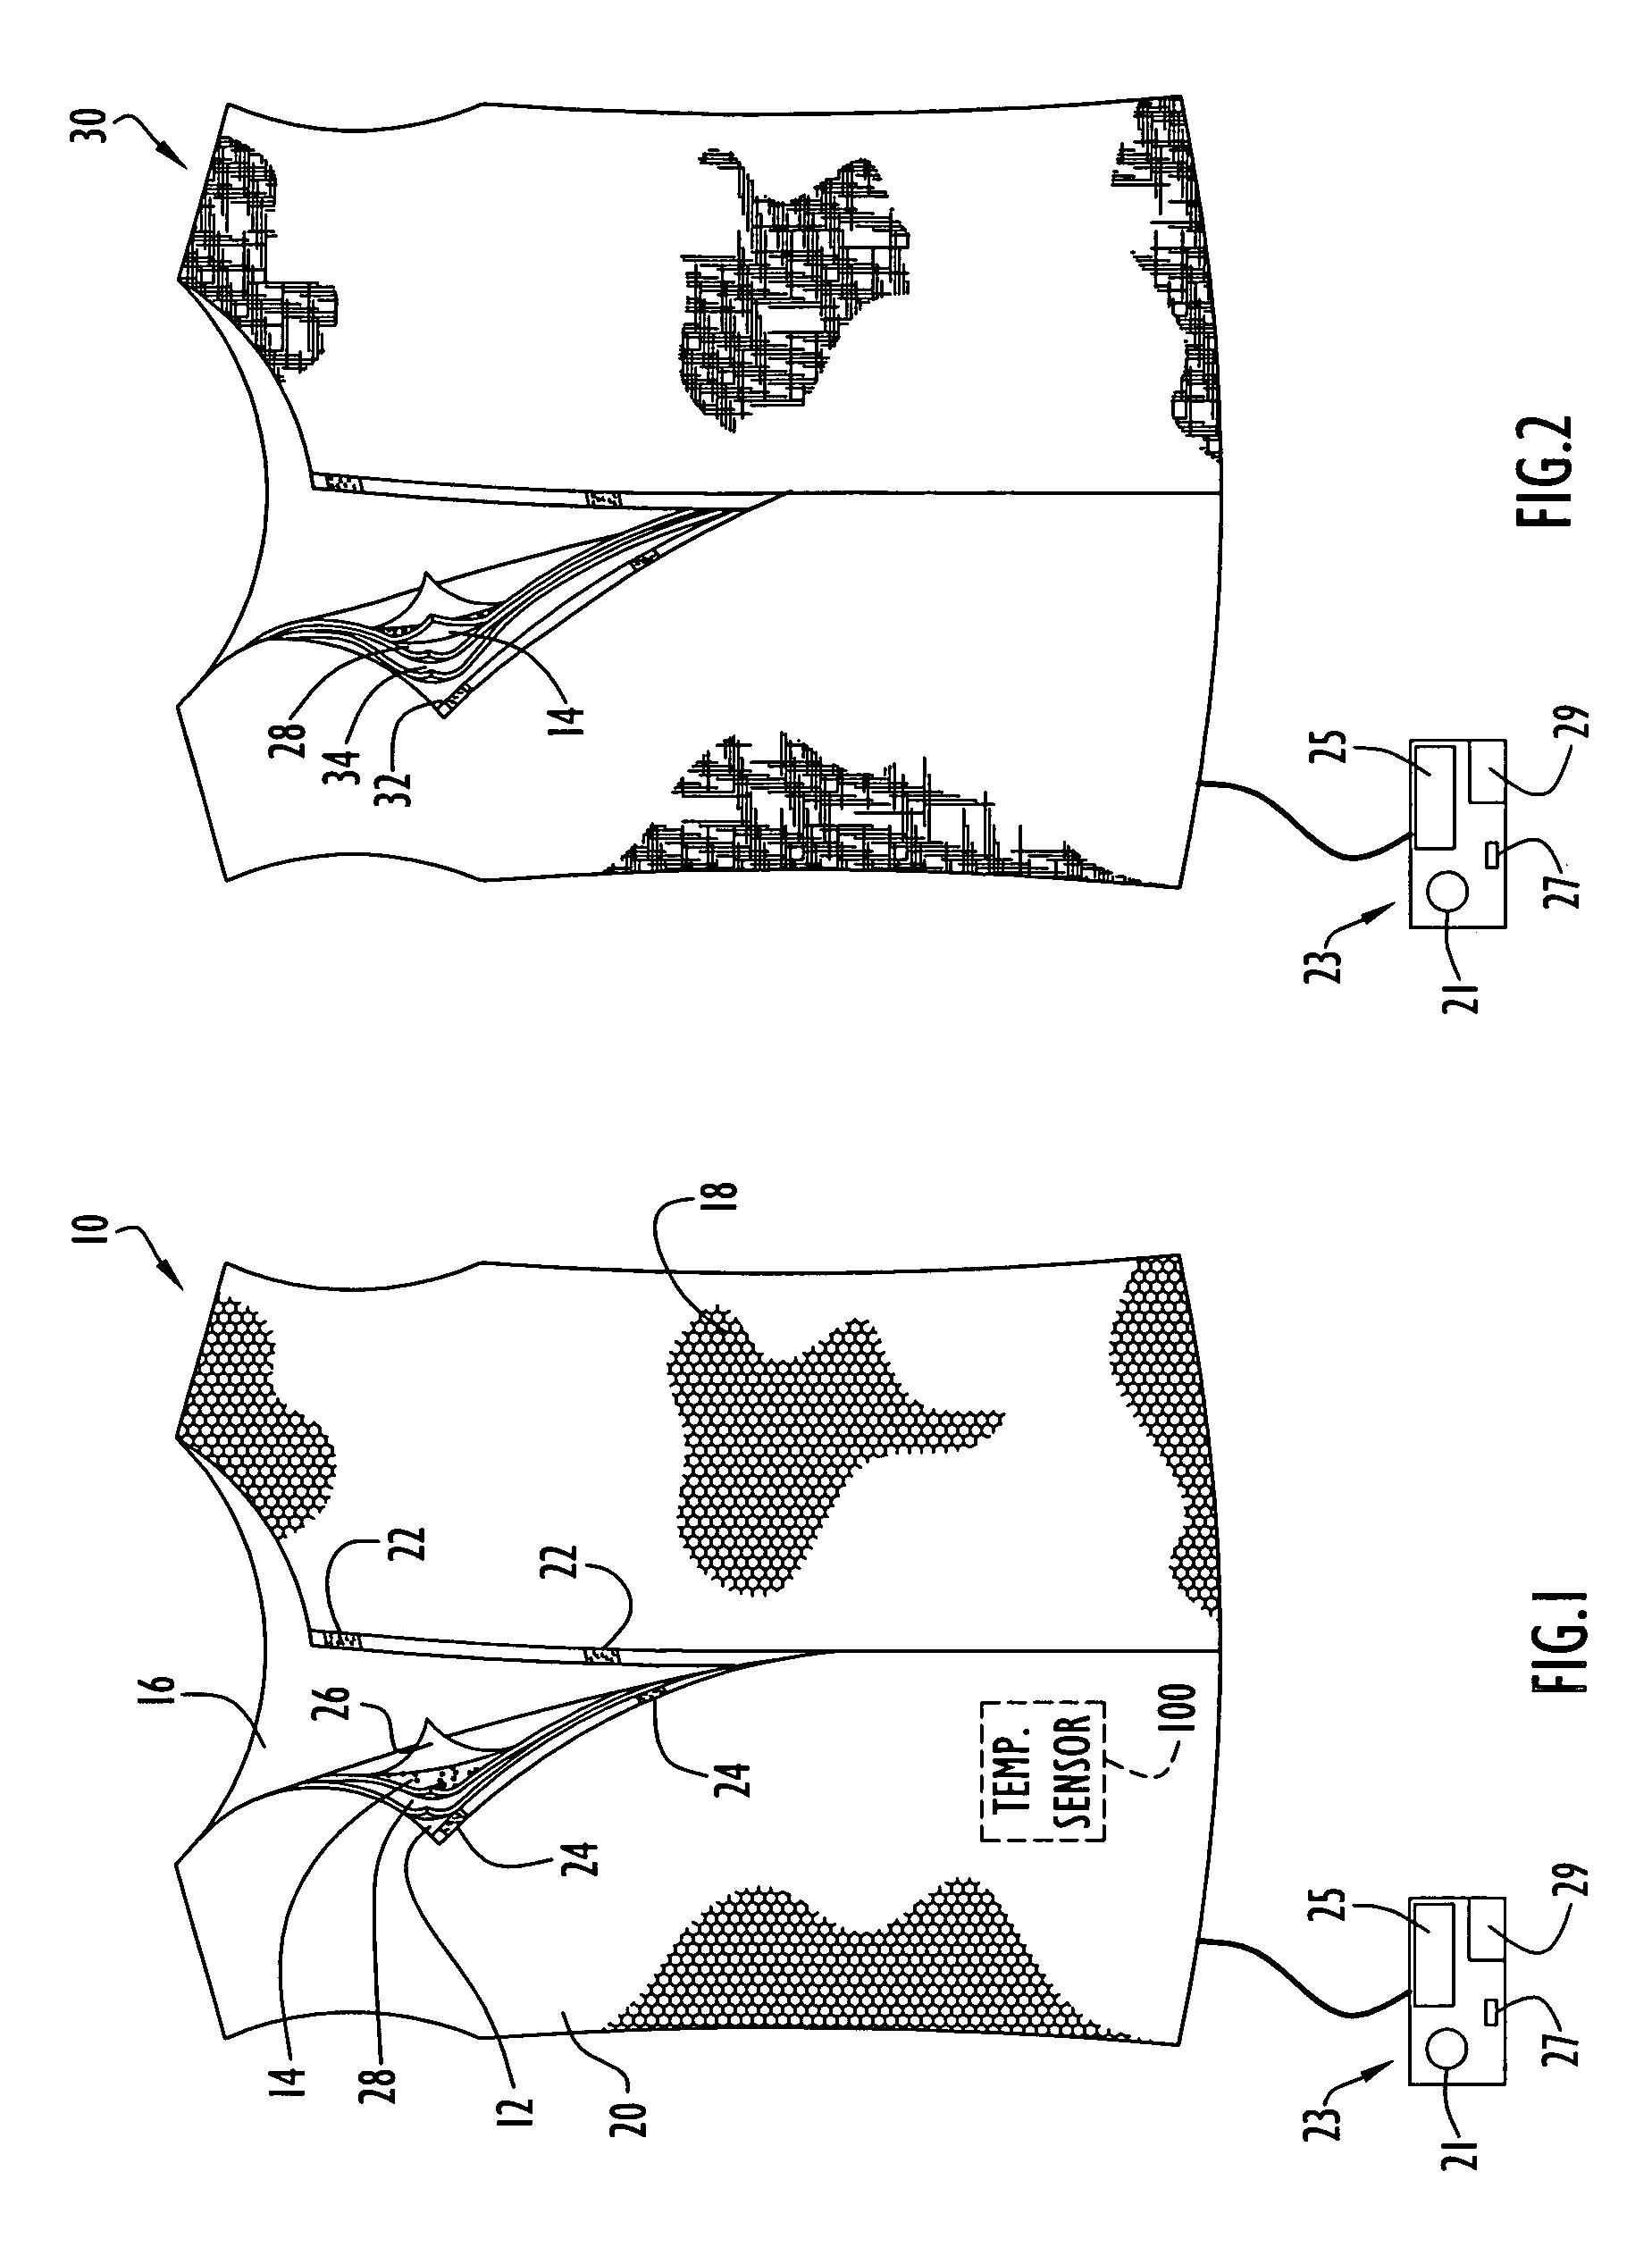 Thermal treatment garment and method of thermally treating body portions